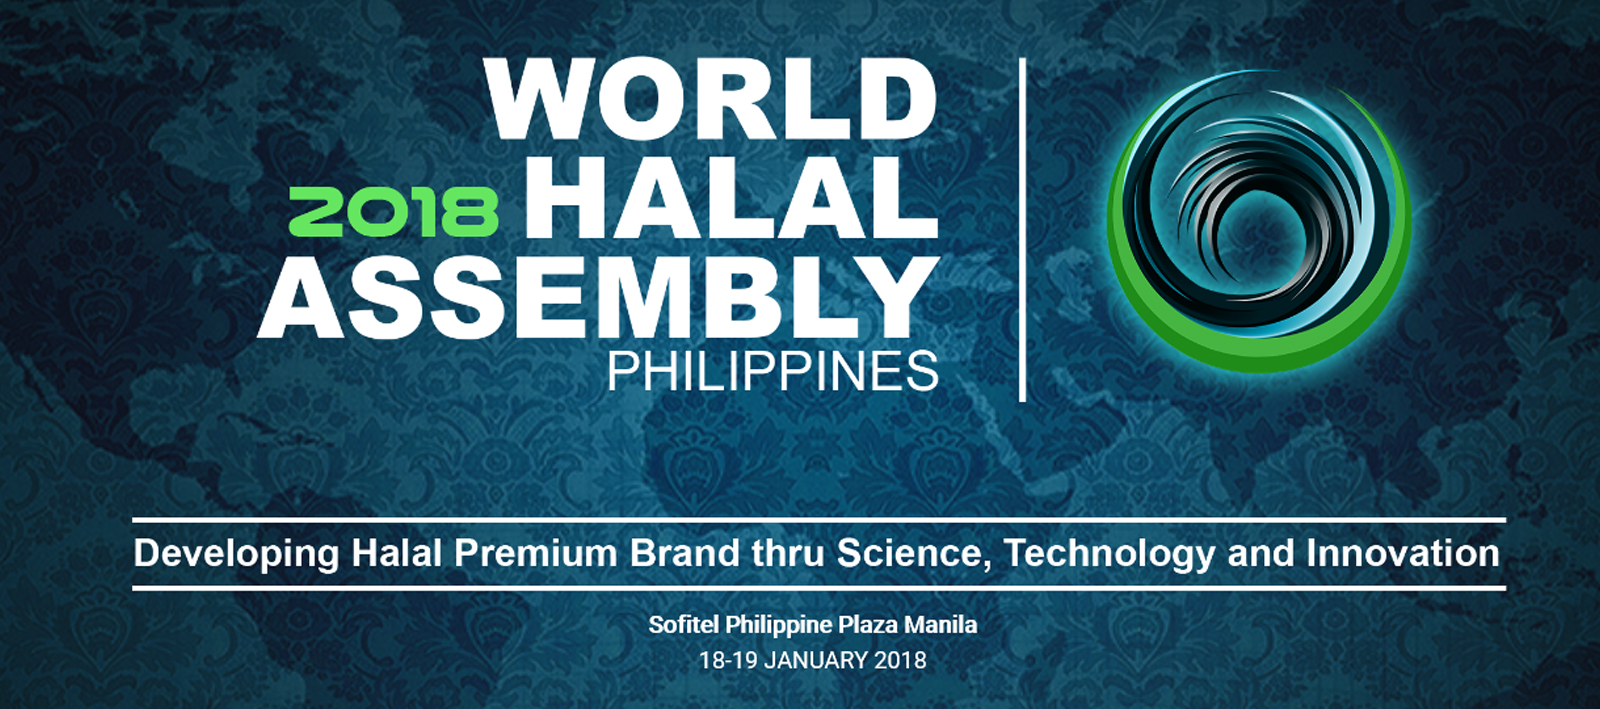 World Halal Assembly Philippines 2018